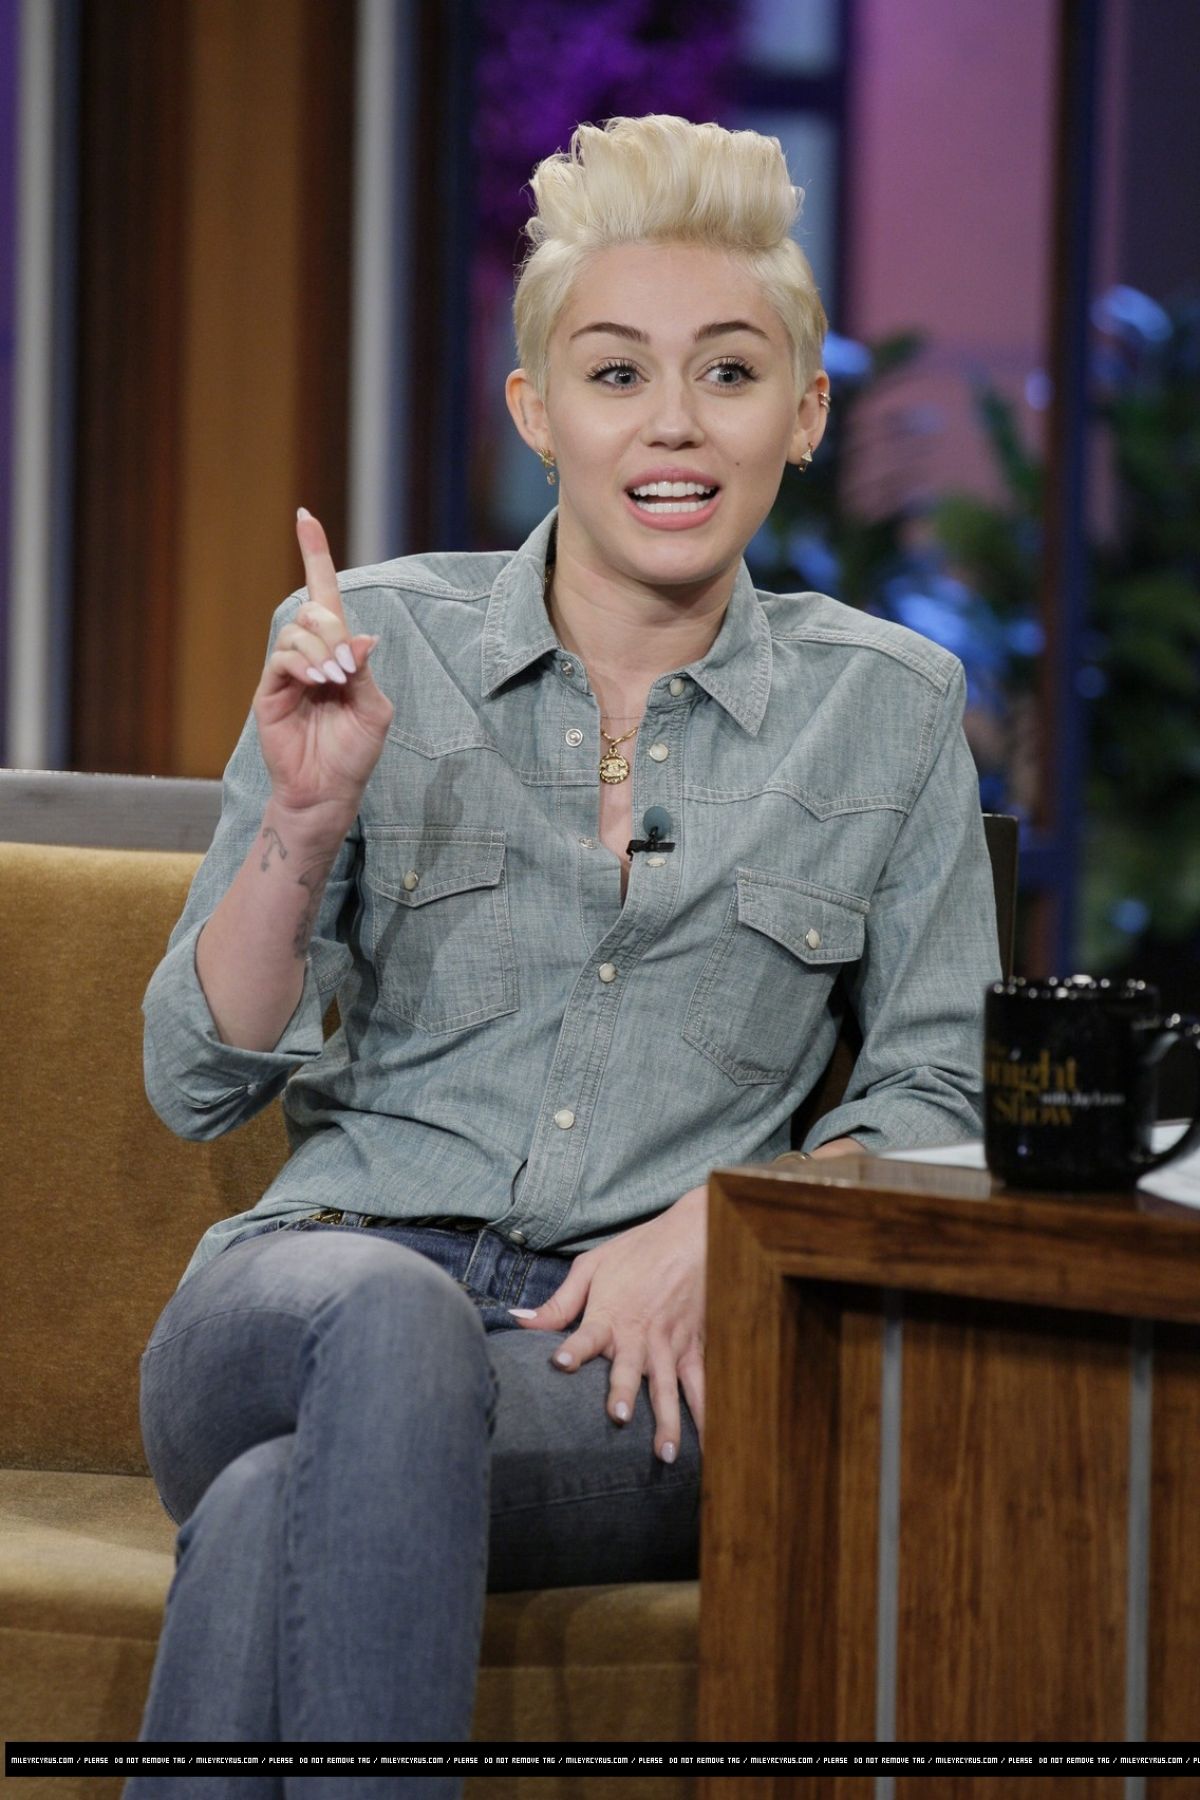 MILEY CYRUS at The Tonight Show with Jay Leno – HawtCelebs